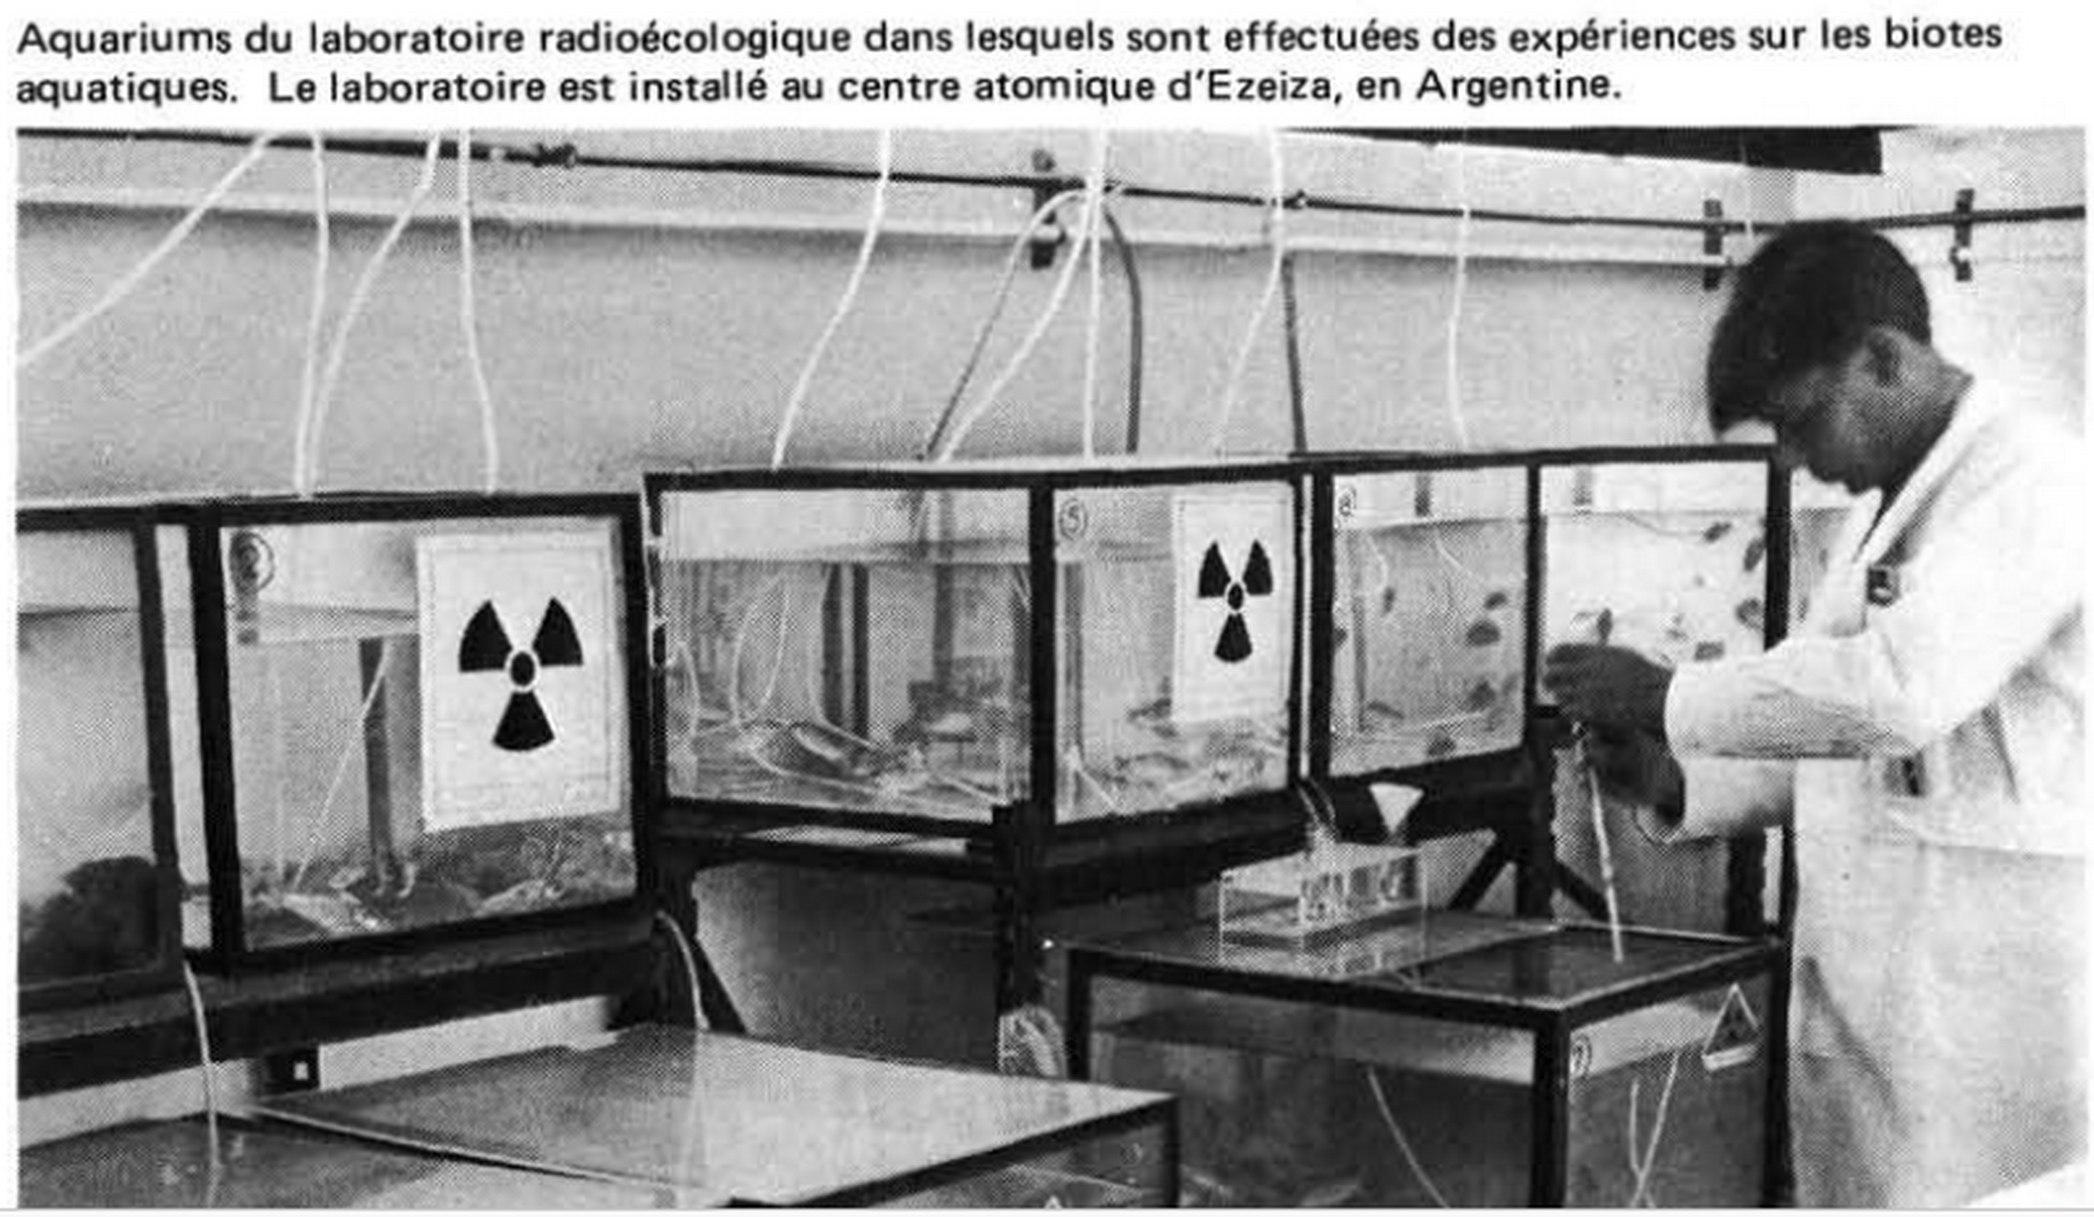 s-a-souslaplage-animals-hate-the-nuclear-industry-22.jpg